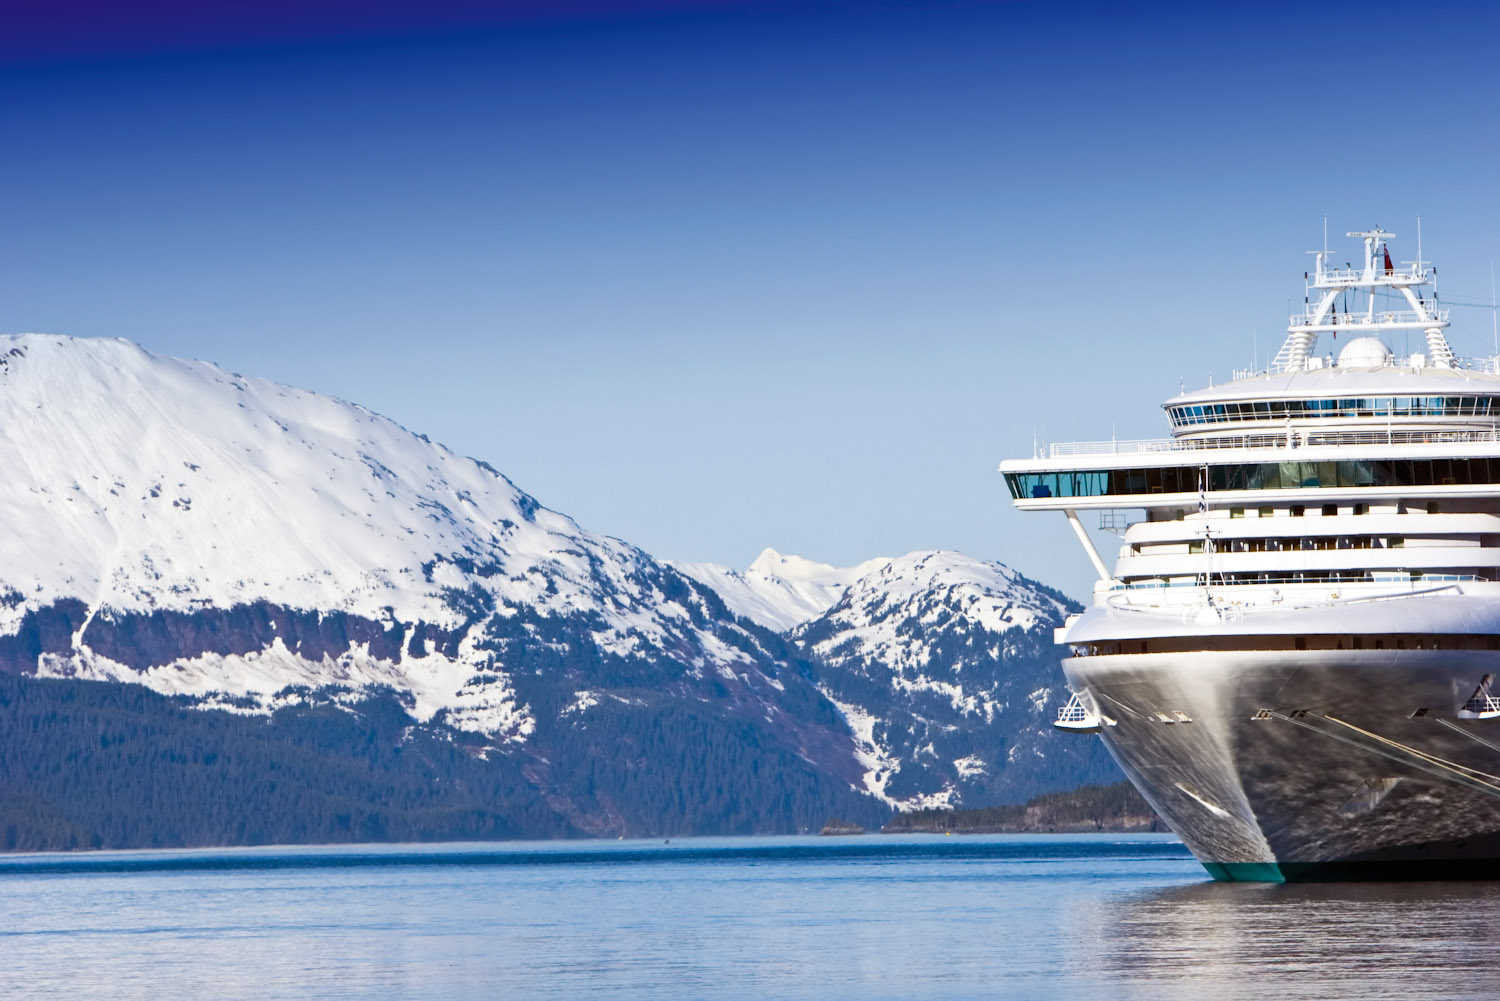 Alaska was voted the best destination for cruising in International Traveller's Readers' Choice Awards 2015.